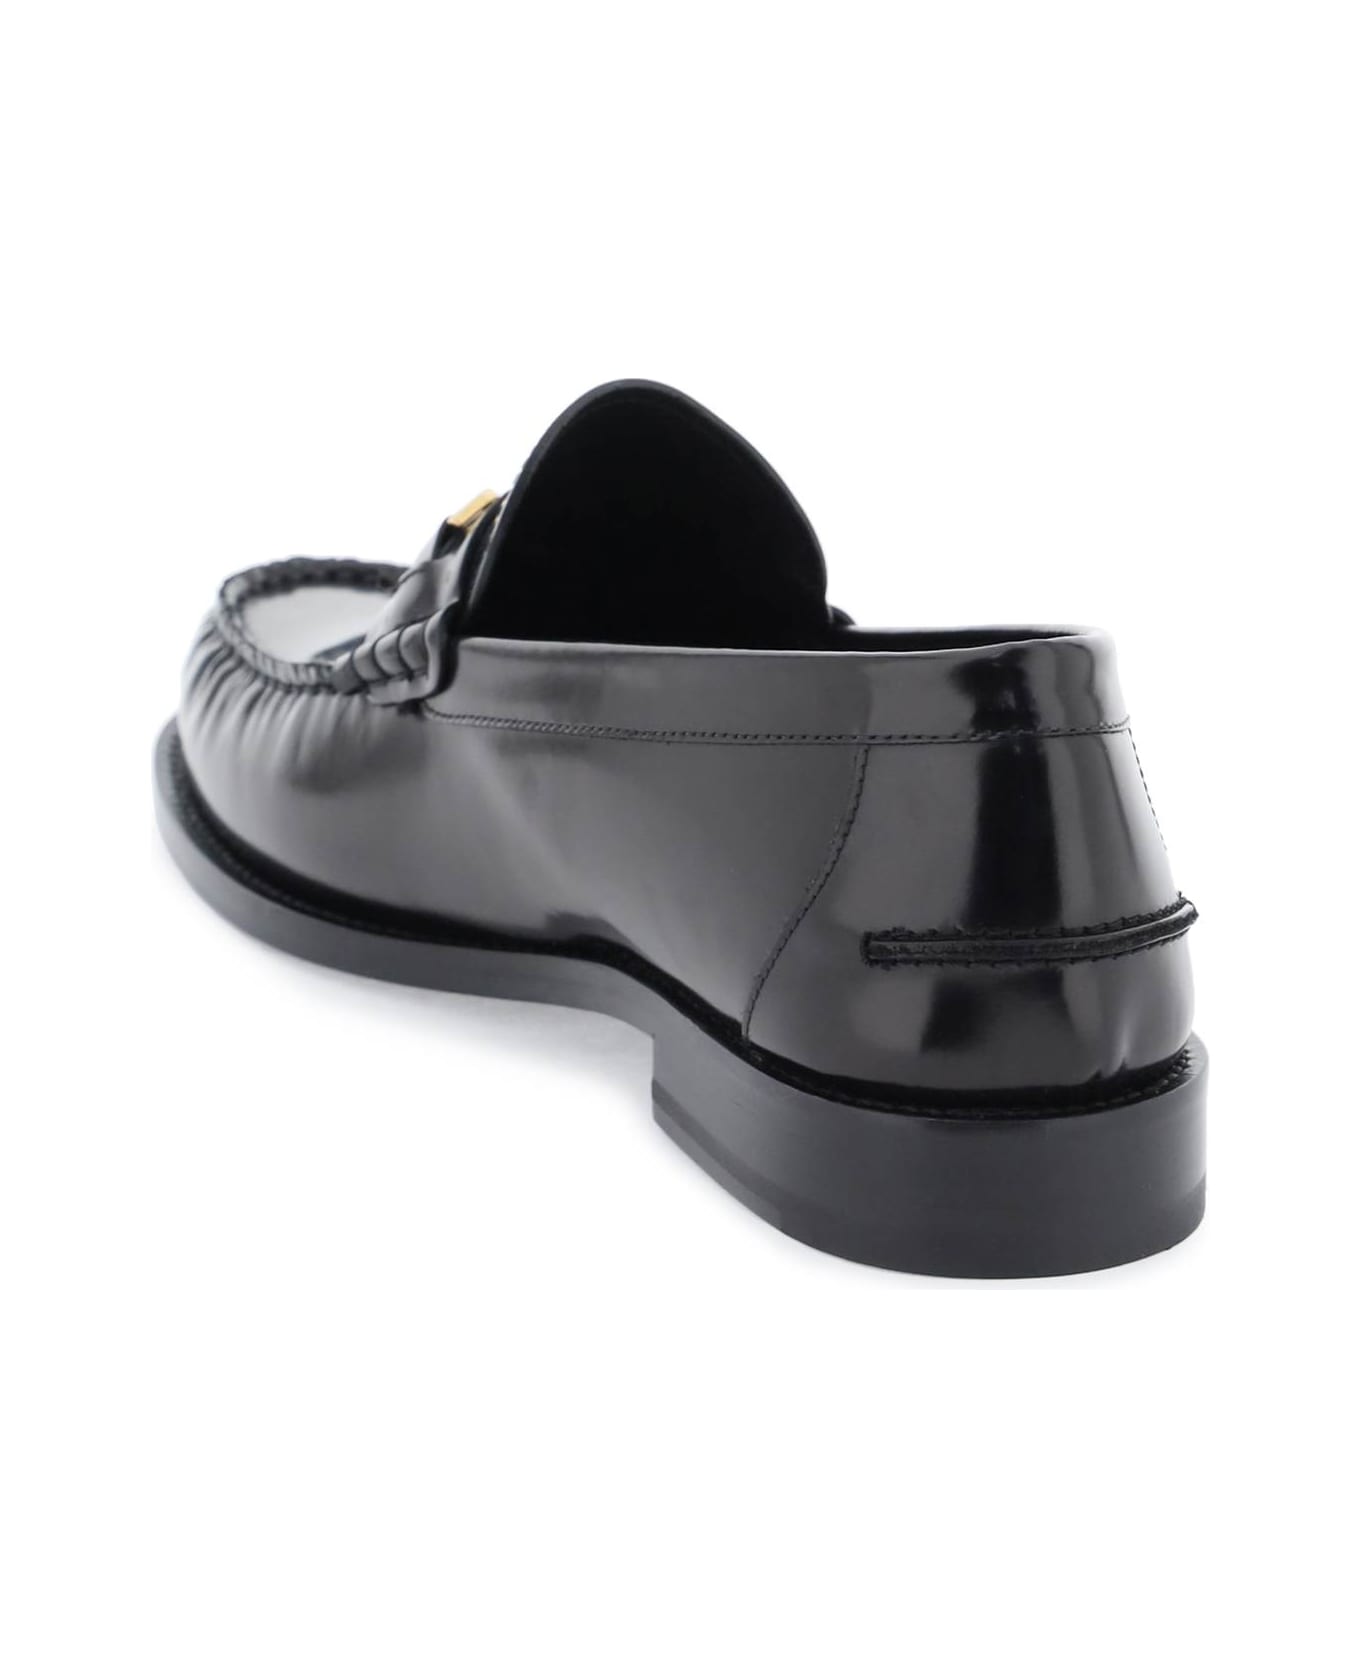 Versace Black Leather Loafers - Black/versace Gold